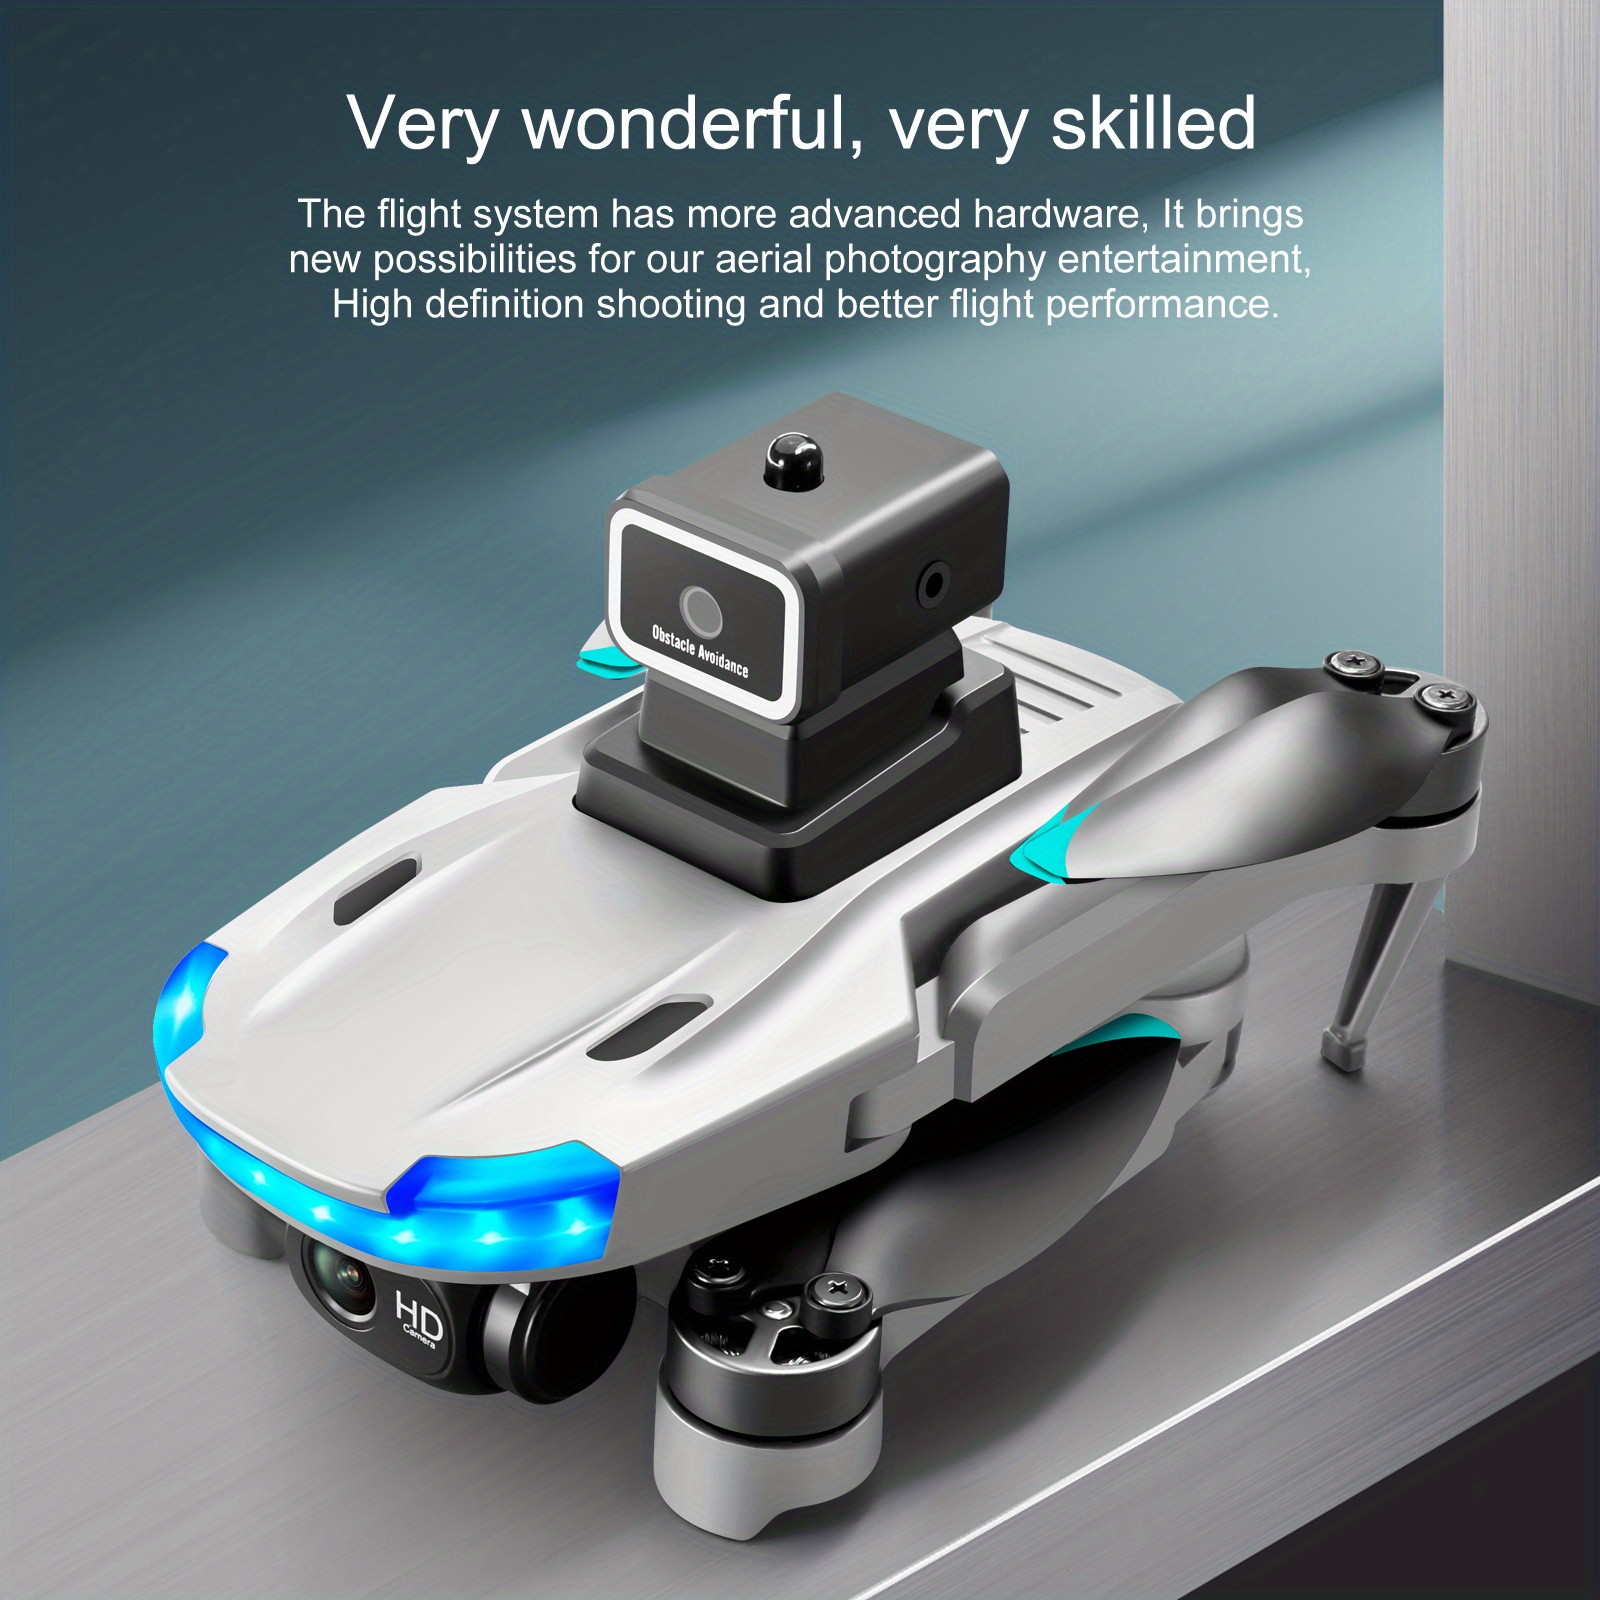 s138 brushless optical flow remote control drone with hd dual camera 1 3 batteries optical flow positioning esc camera brushless motor headless mode 360 intelligent obstacle avoidance wifi fpv details 5